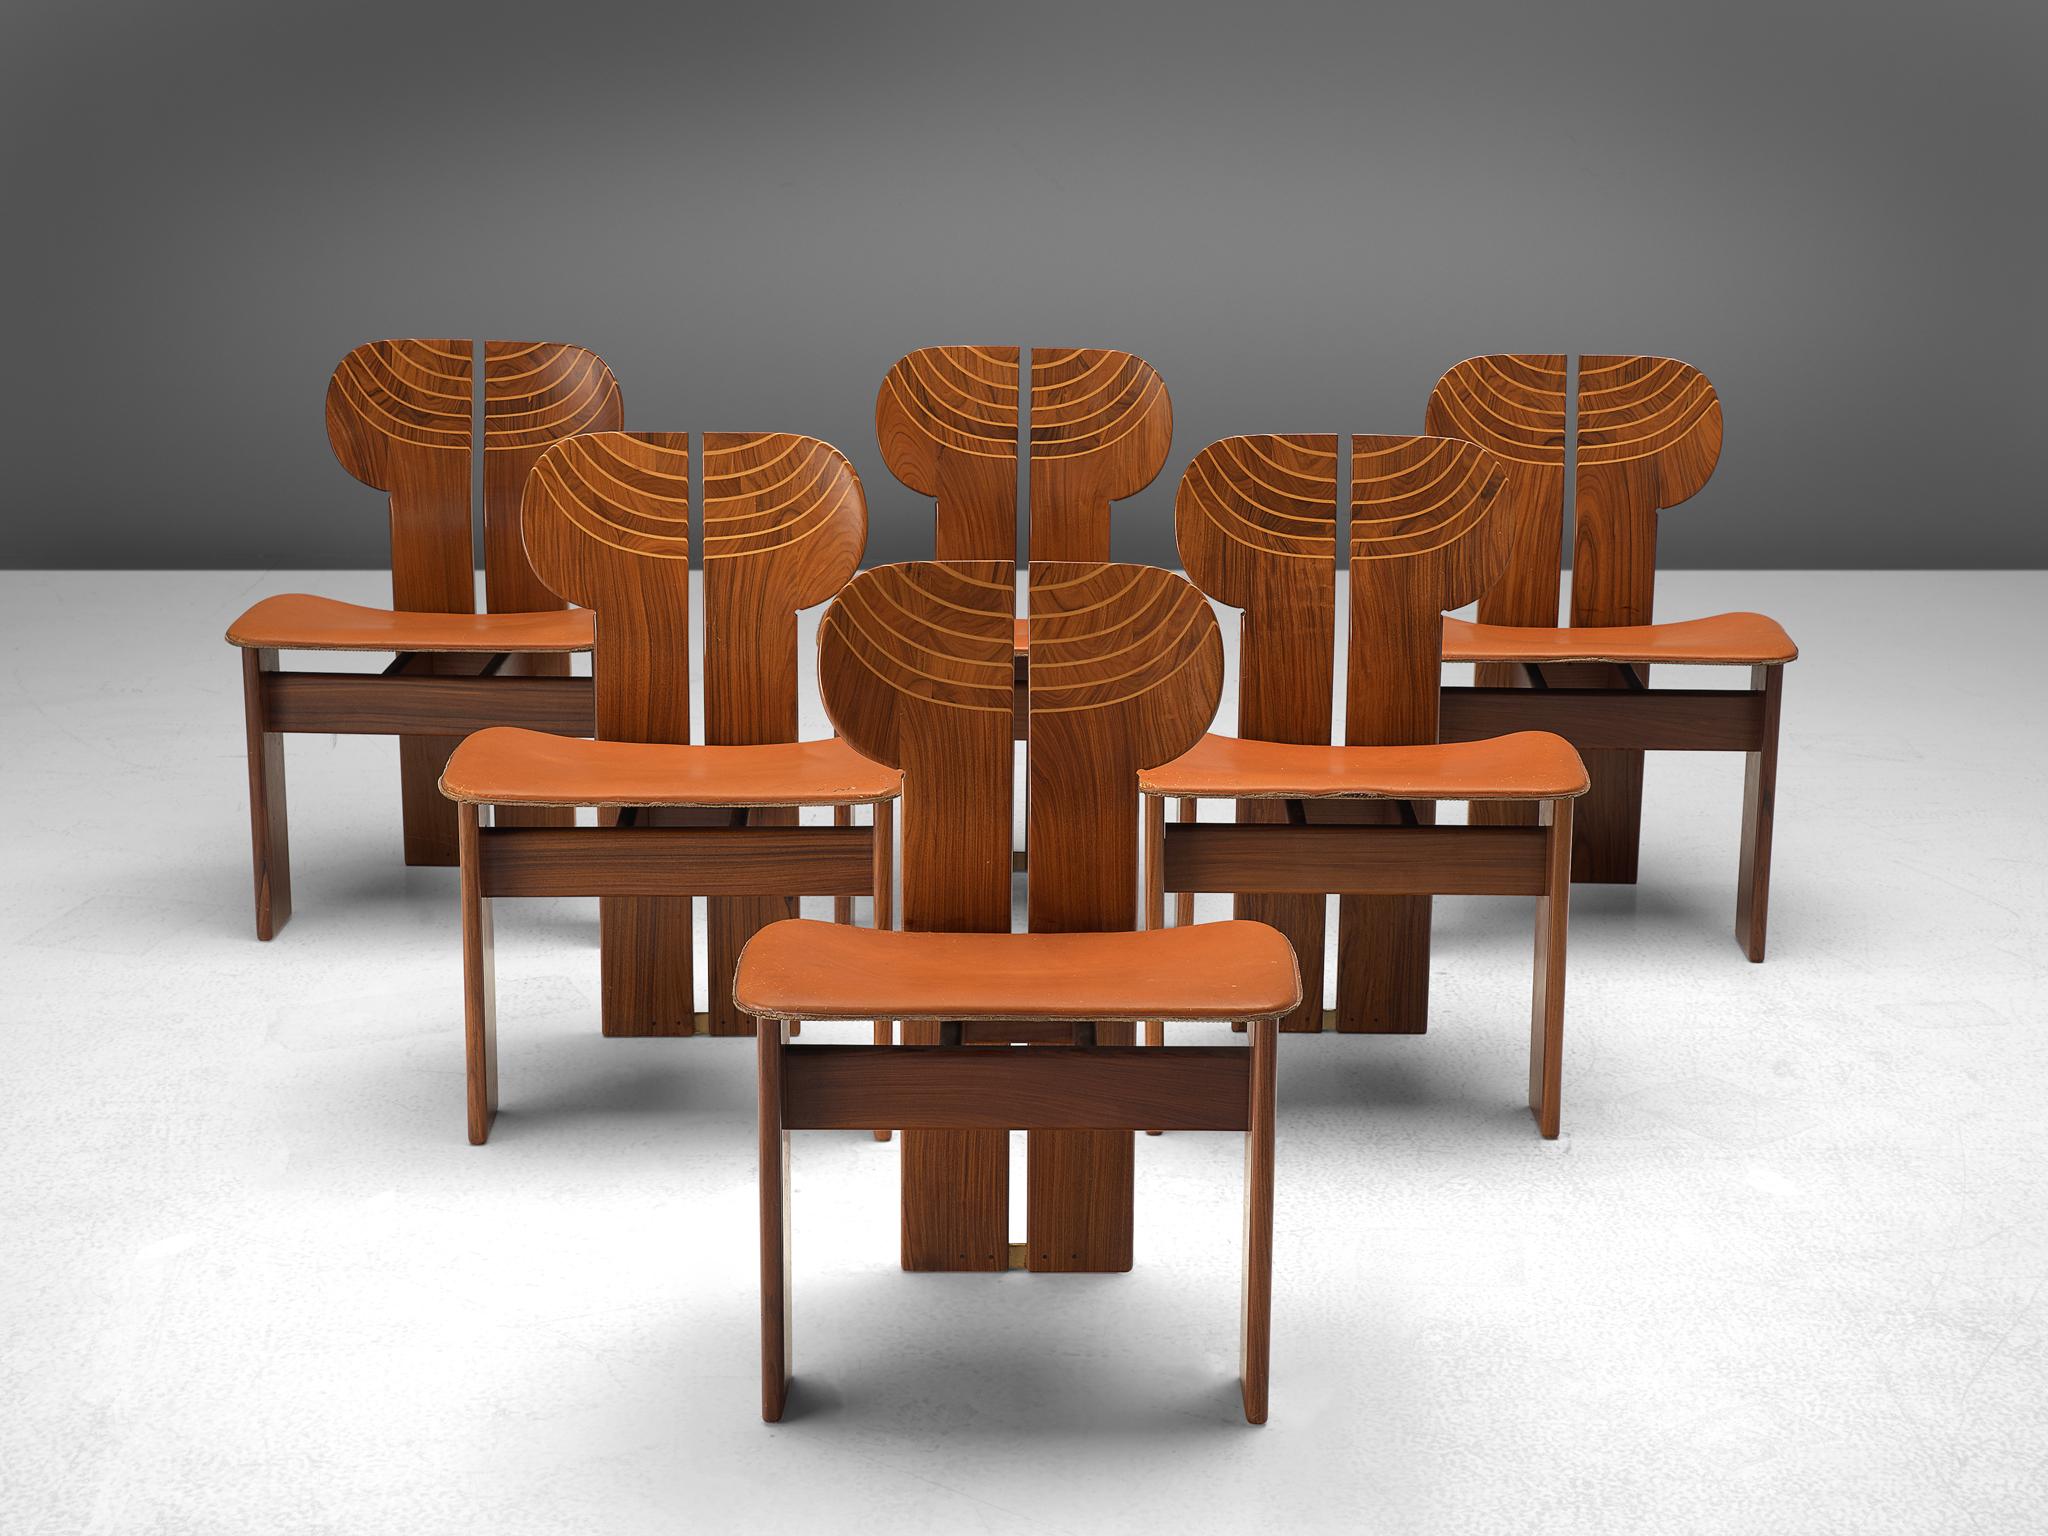 Afra & Tobia Scarpa for Maxalto, set of six dining chairs, cognac leather, walnut and brass, Italy, 1975.

This set of chairs explicitly sculptural grand chairs are by Afra & Tobia Scarpa and are titled 'Africa' being part of the Artona collection